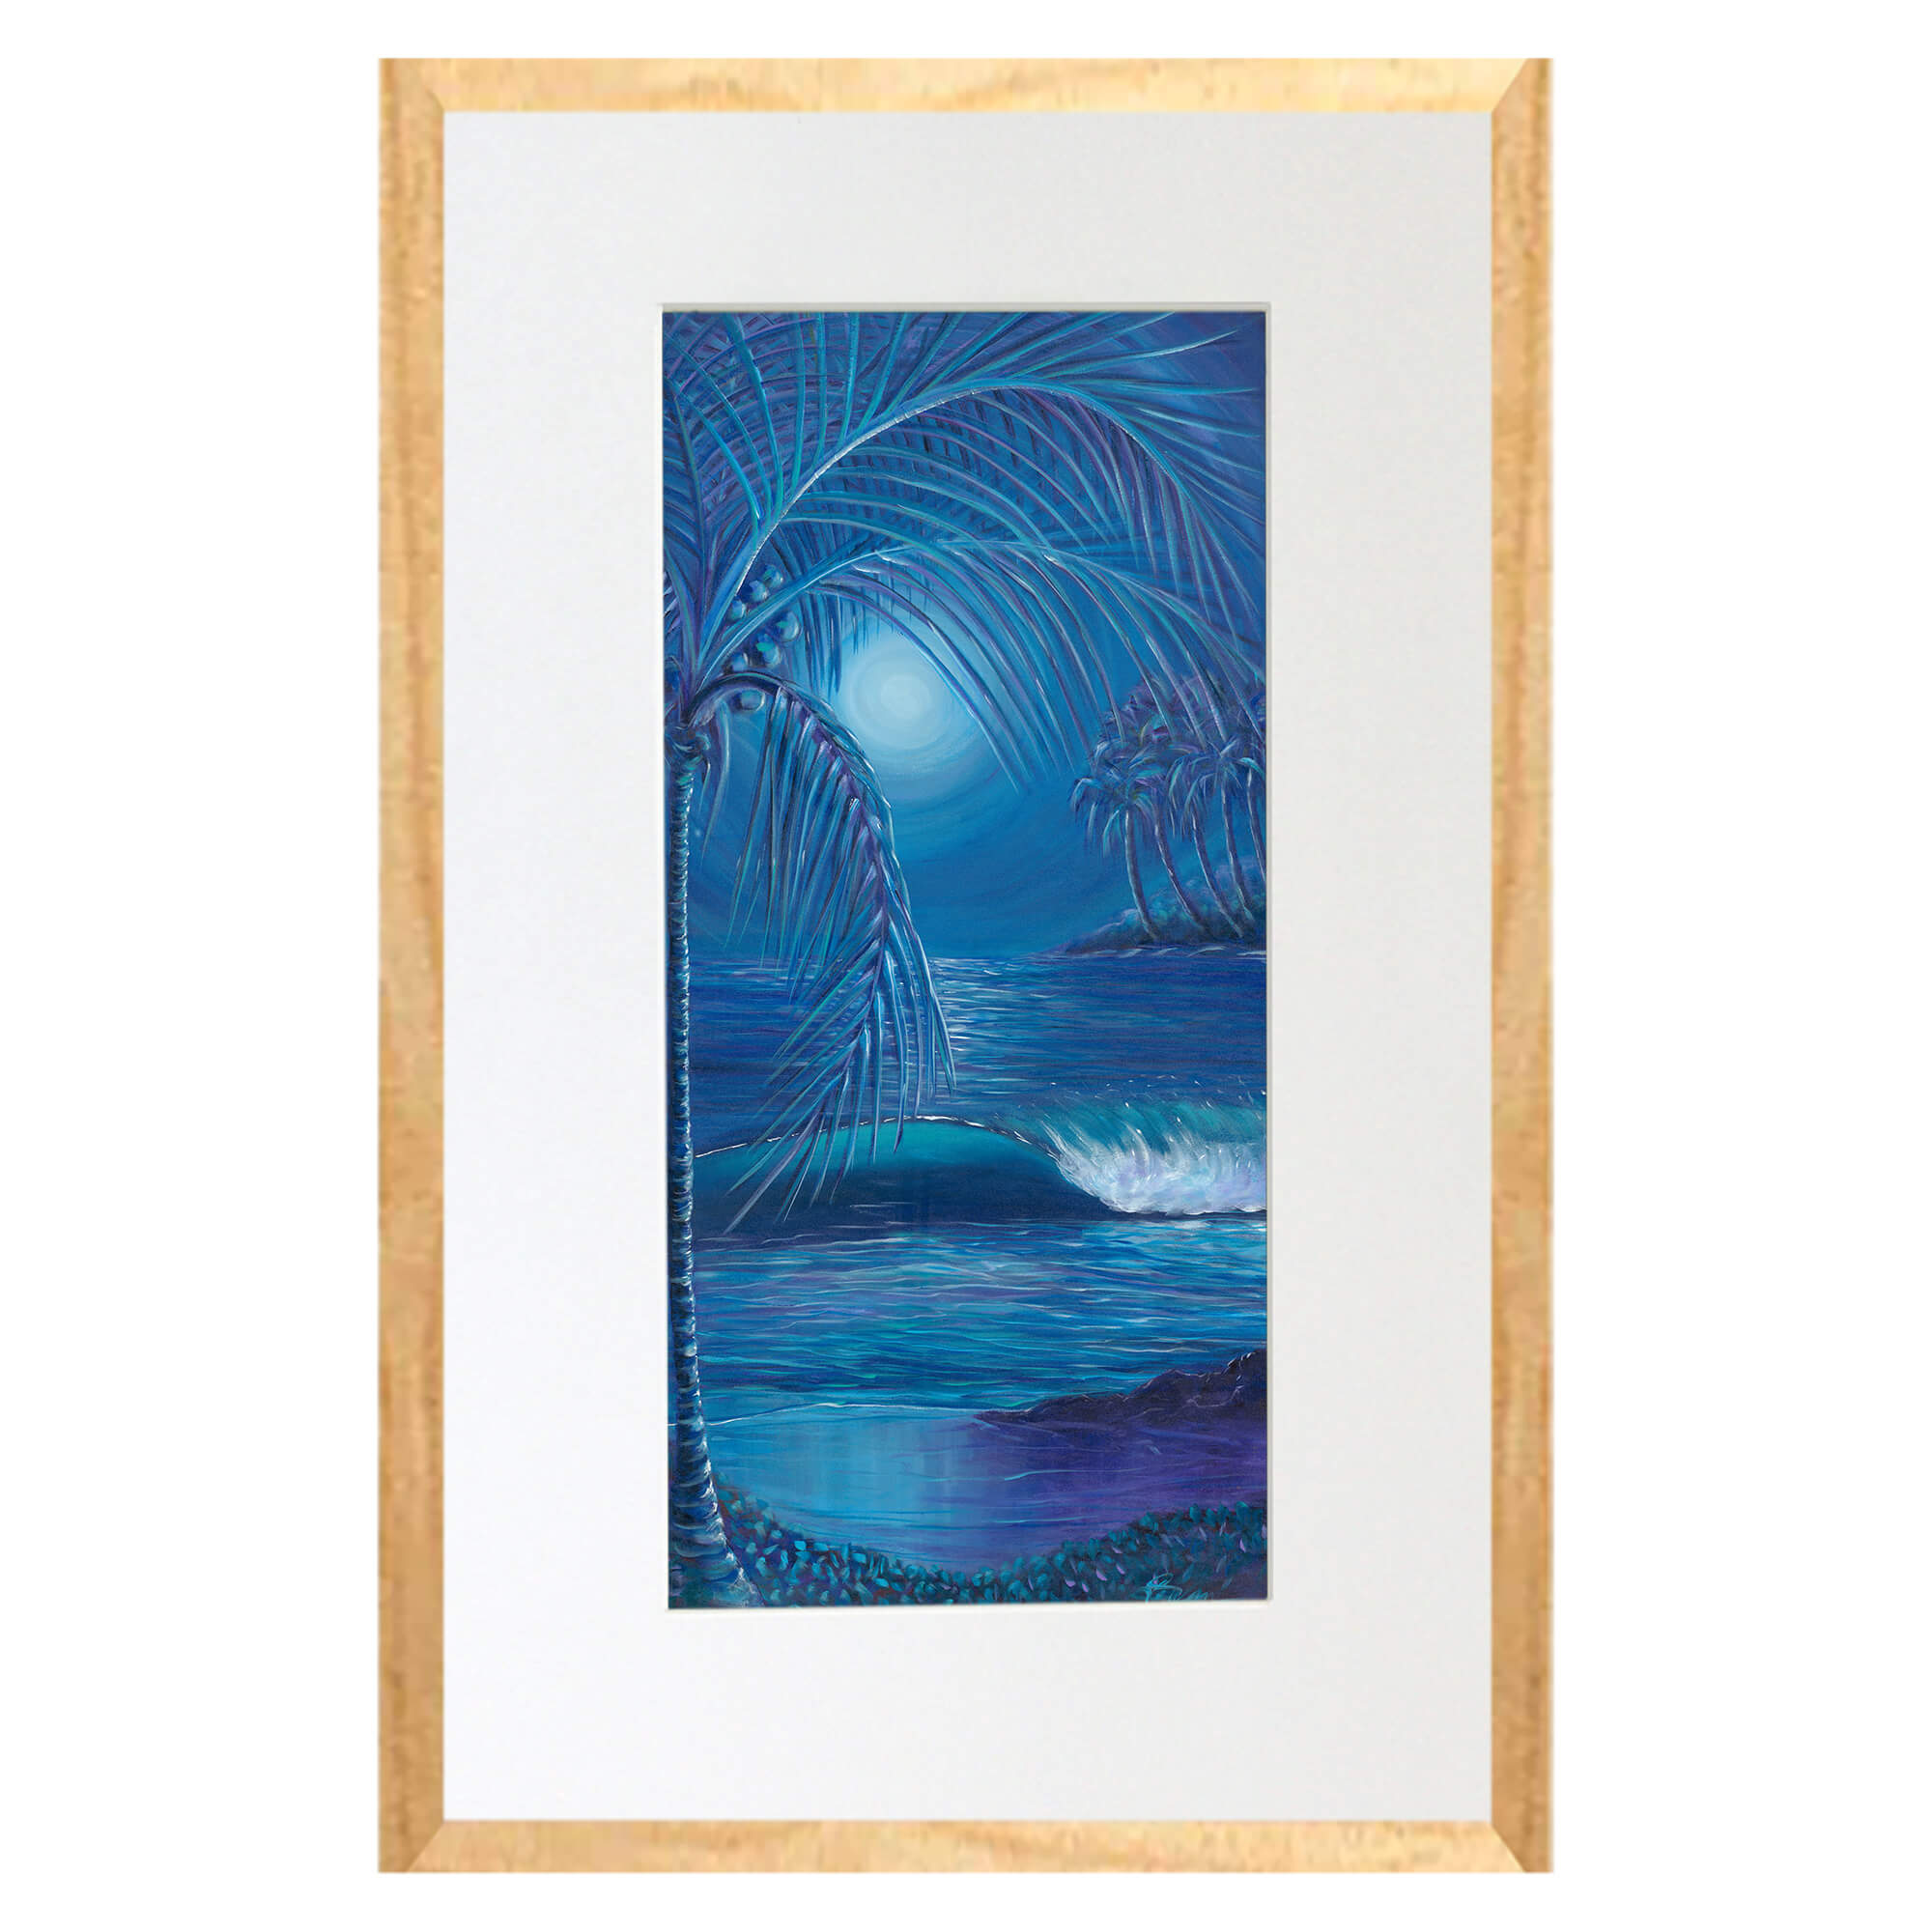 Matted art print with wood frame featuring the moon during night time  MacAdam